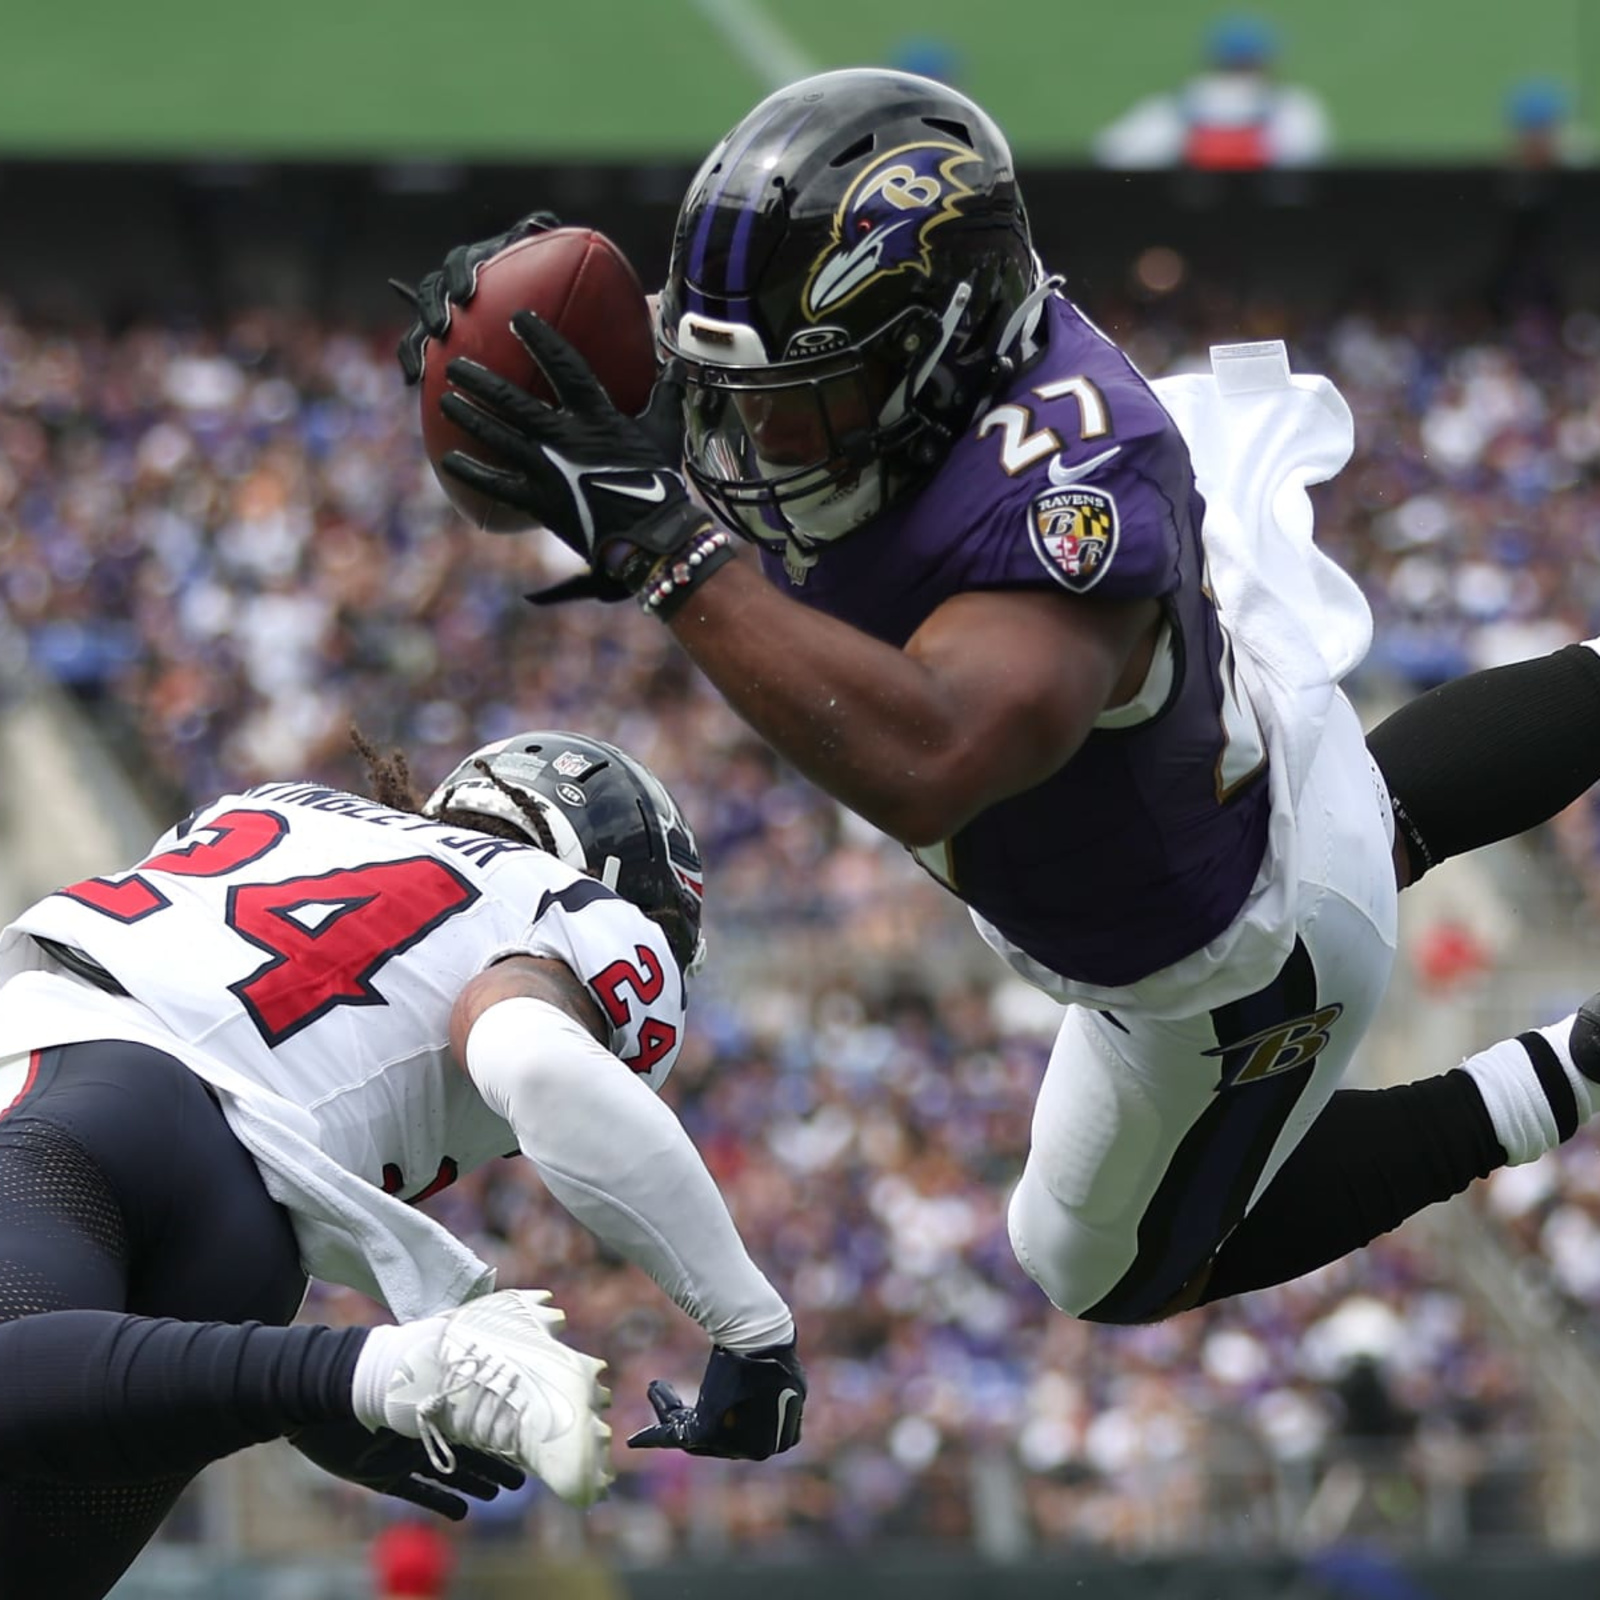 How to Watch Texans vs Ravens Game for Free